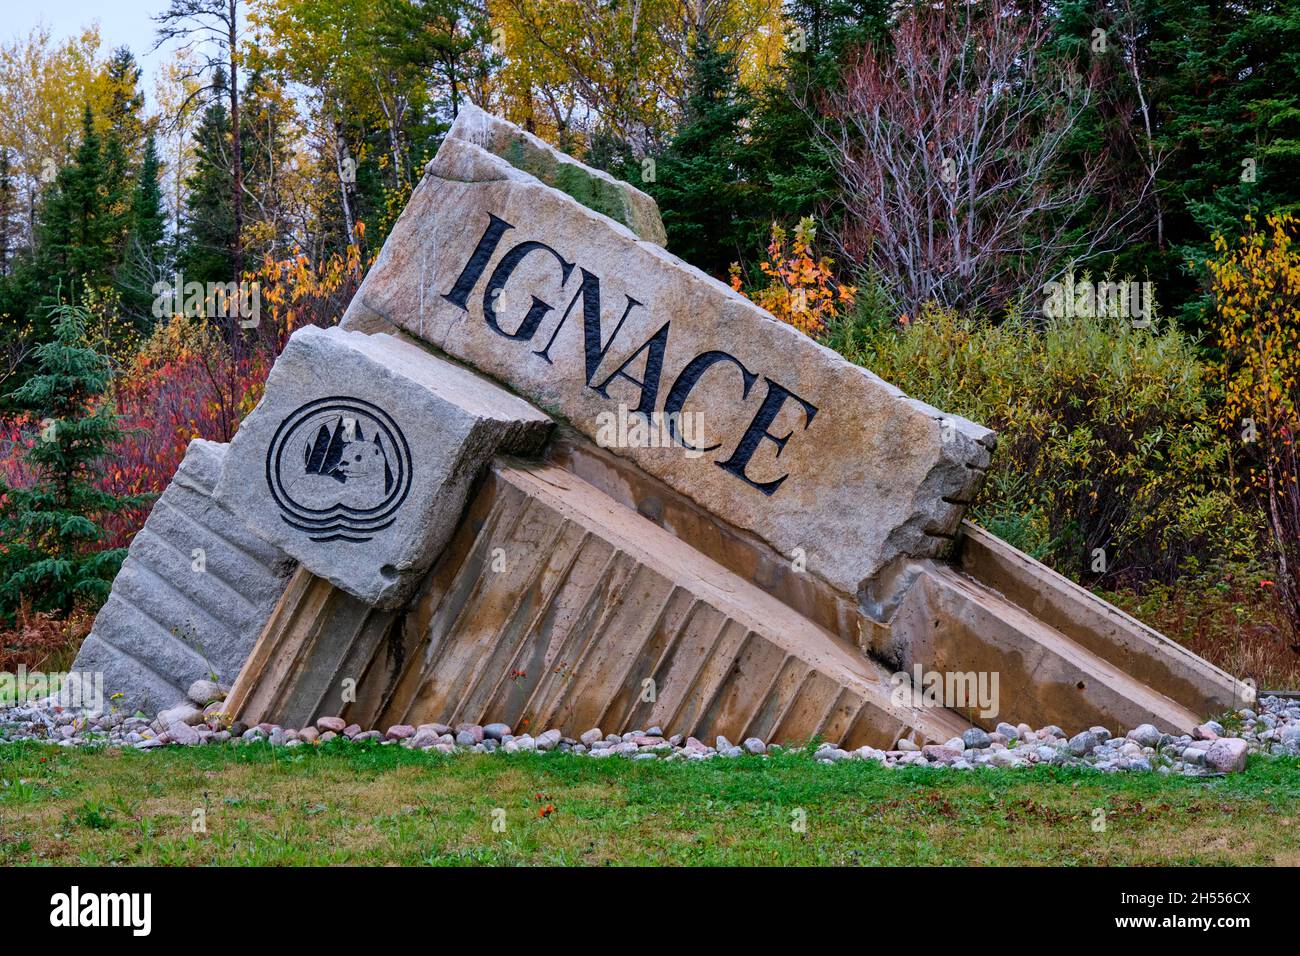 Ignace welcome sign located on the edge of the town of Ignace Ontario Canada. Stock Photo